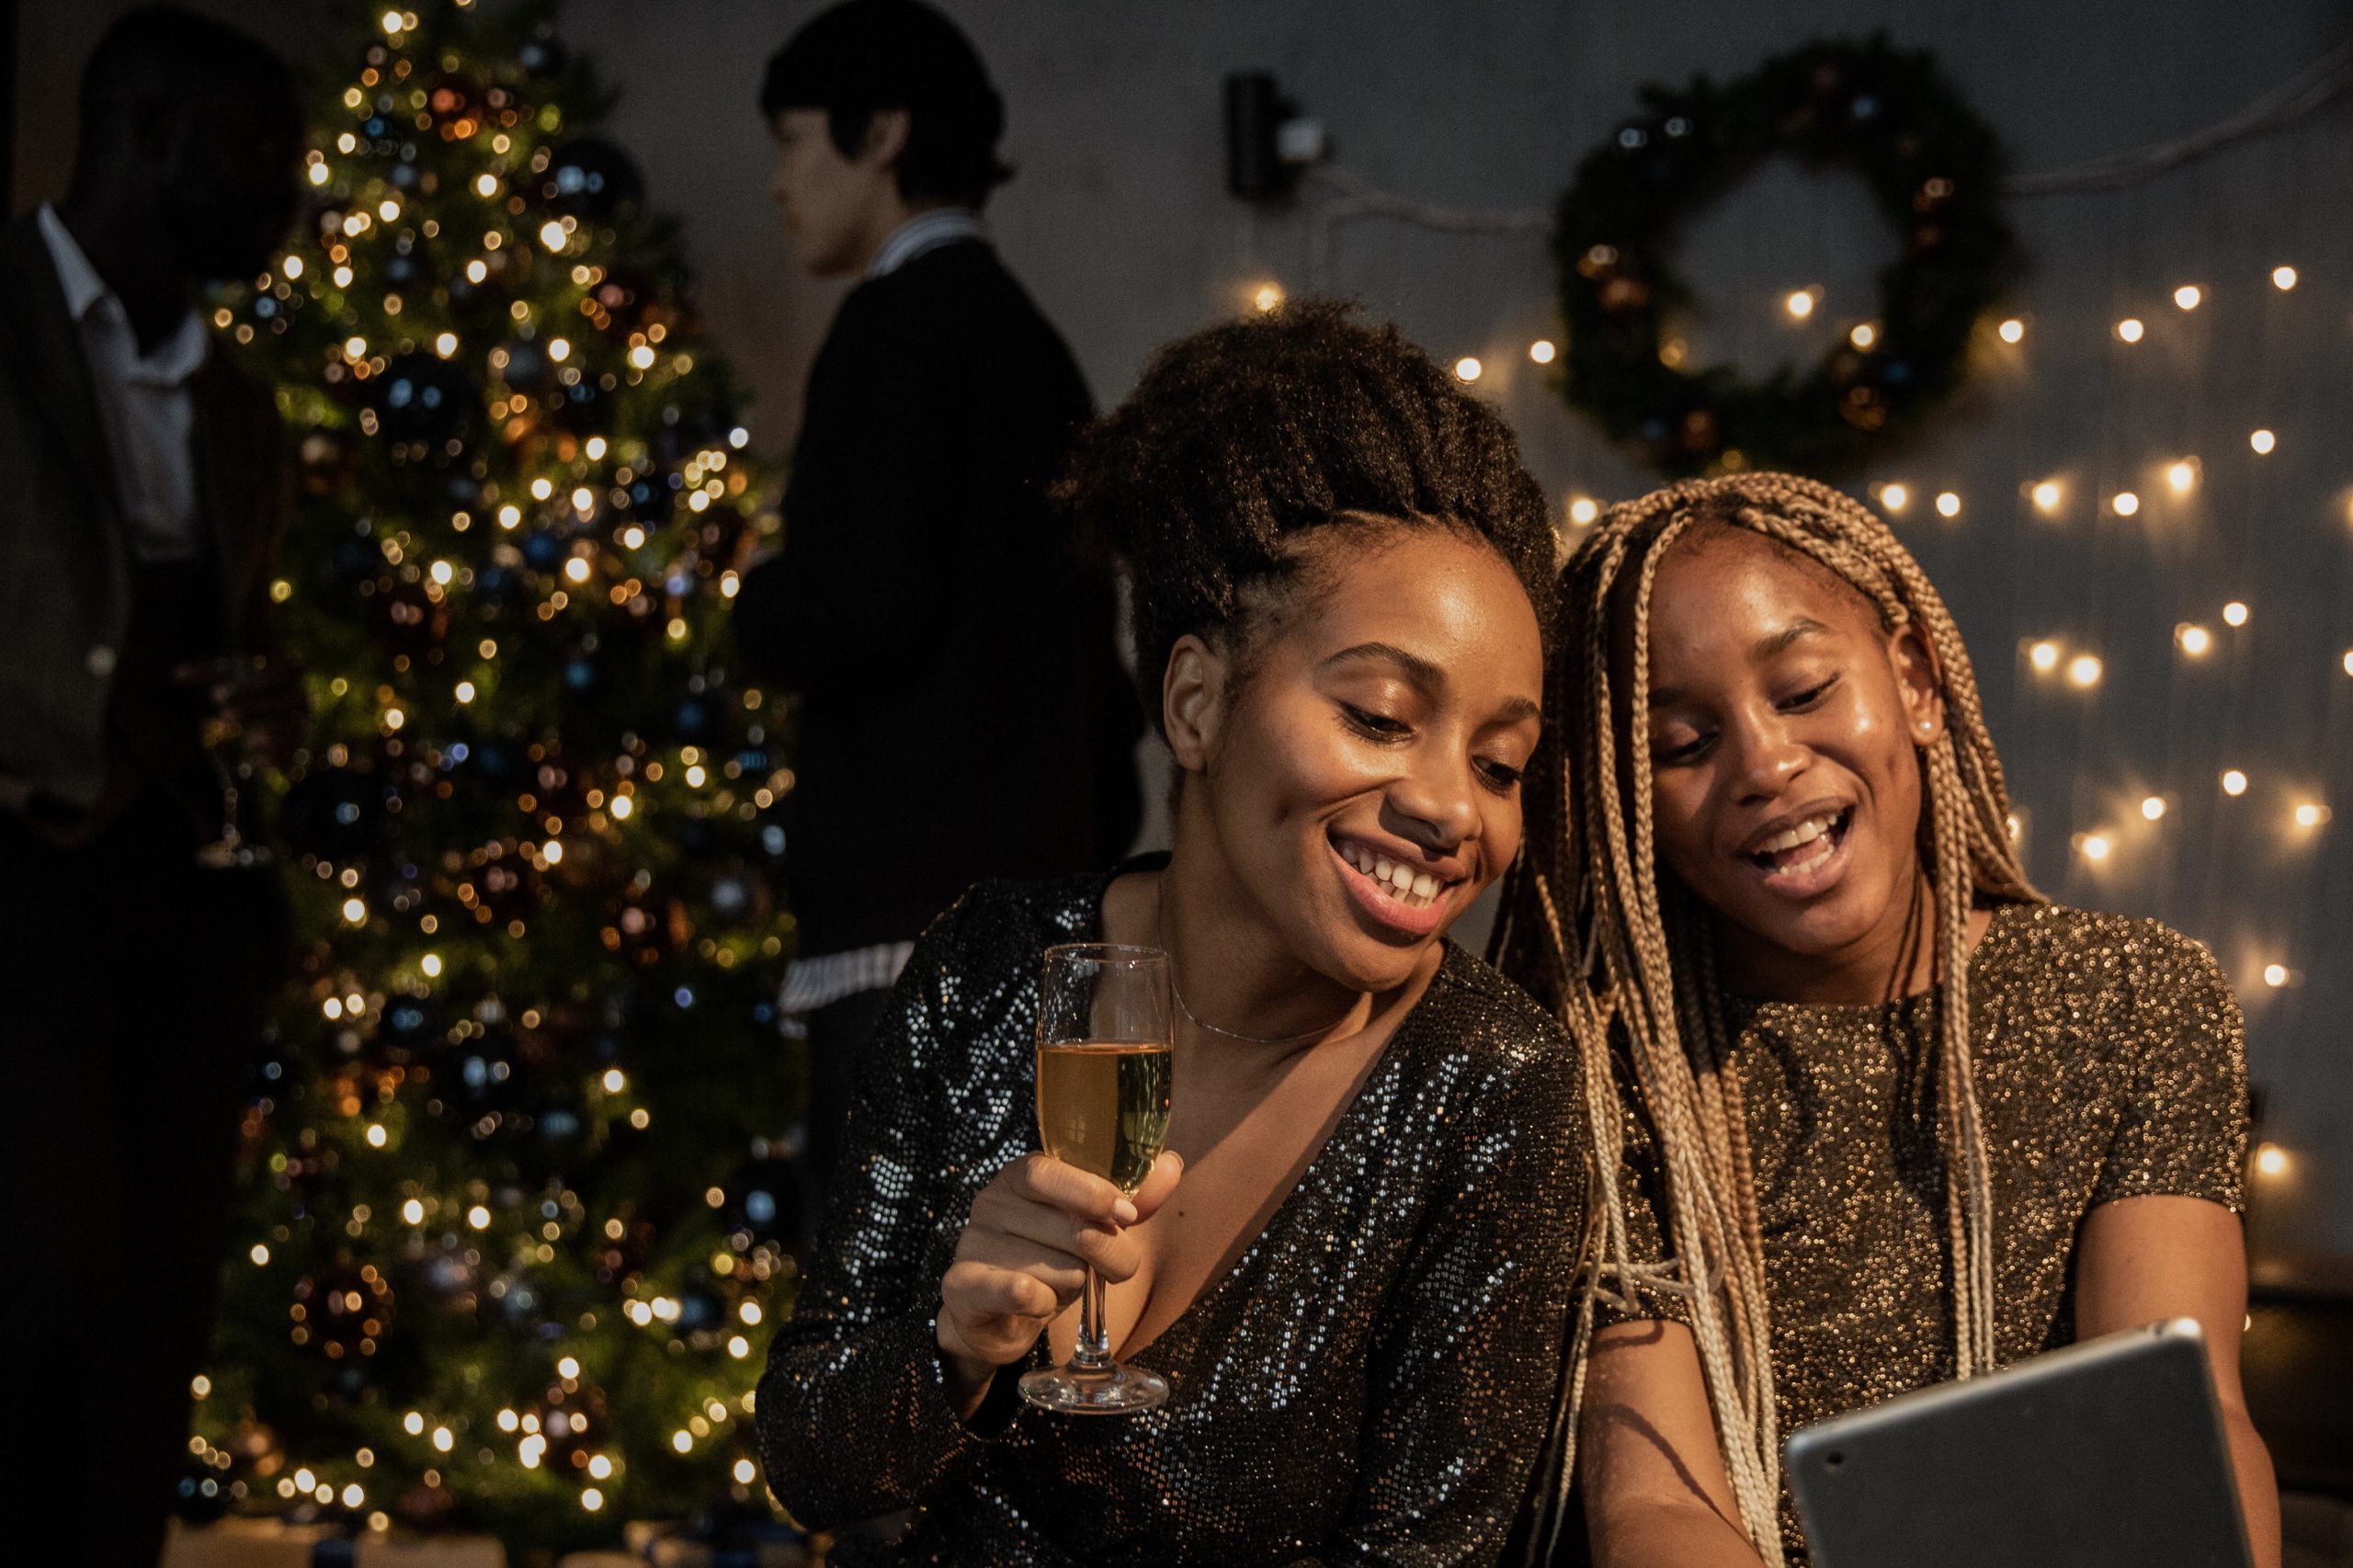 Still Too Early for In-Person Holiday Parties? 3 Ways to Make It Work for Everyone